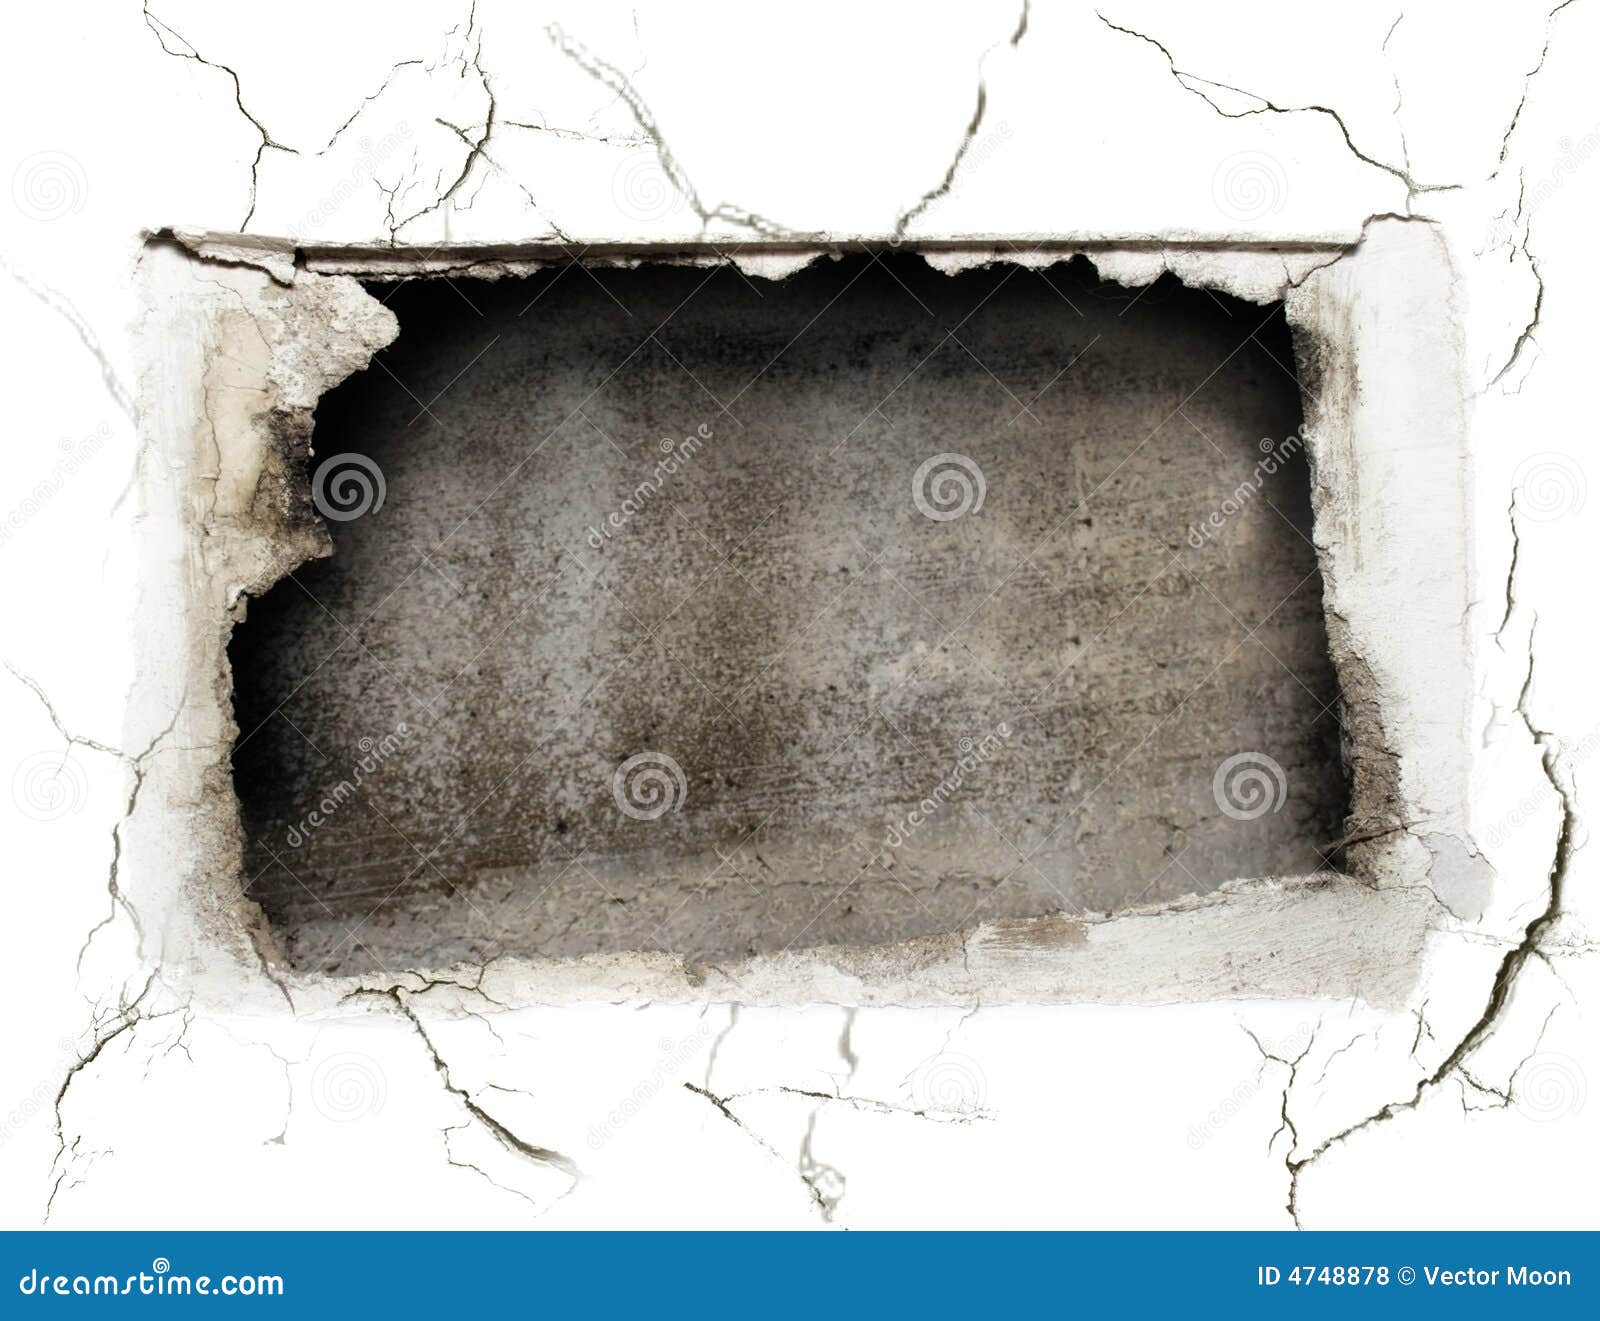 Crushed hole at the wall stock photo. Image of rough, cracked - 4748878